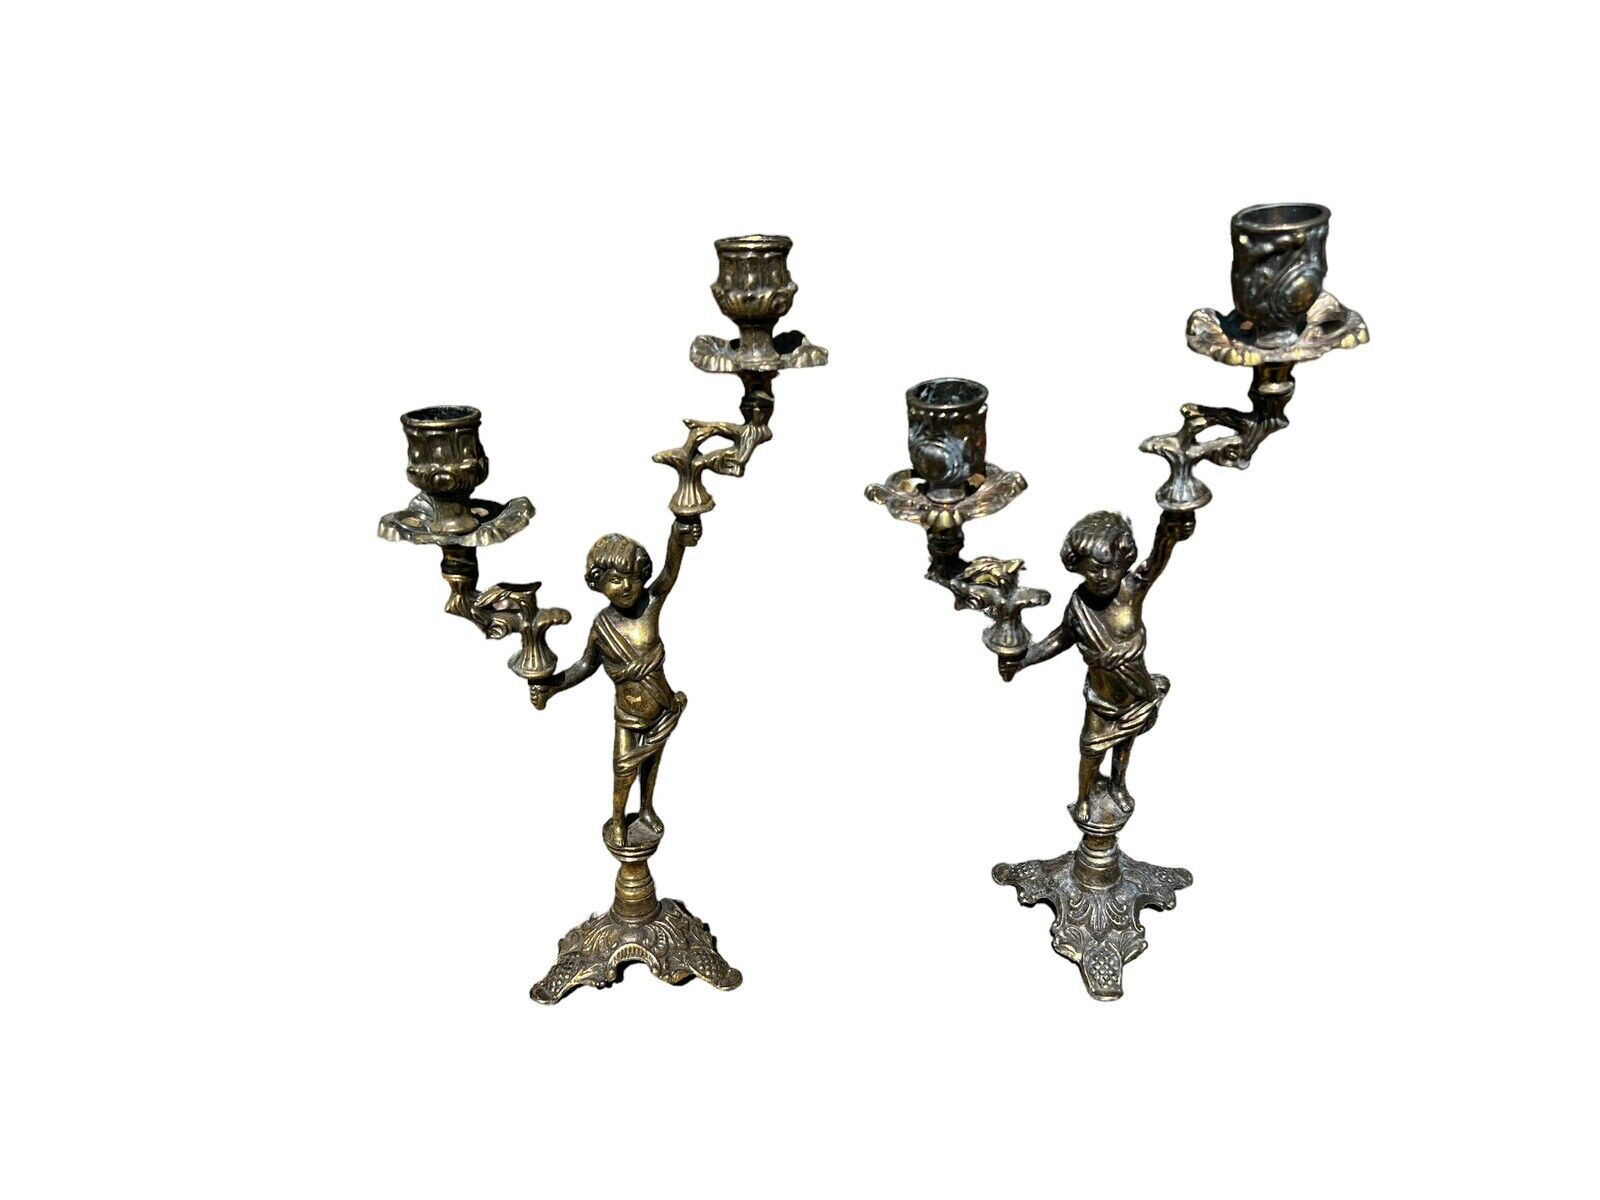 Pair of Vintage Cherub Brass Ornate Candle Holder Candlesticks France Italy